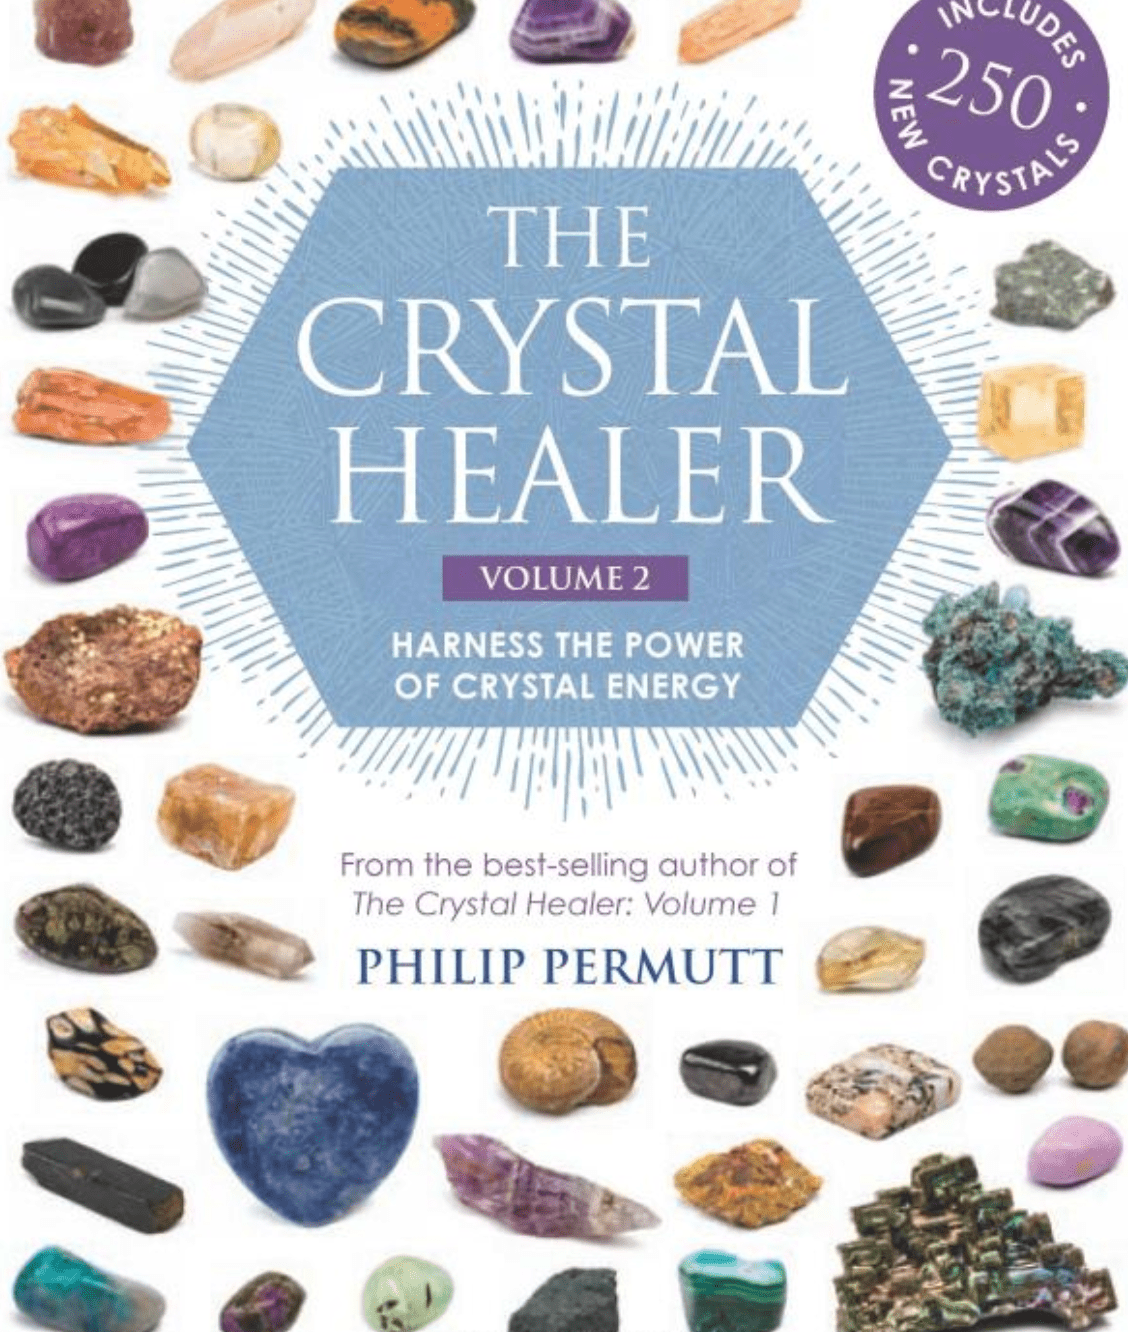 The Crystal Healer: Volume 2: Harness the power of crystal energy. Includes 250 new crystals - Spiral Circle